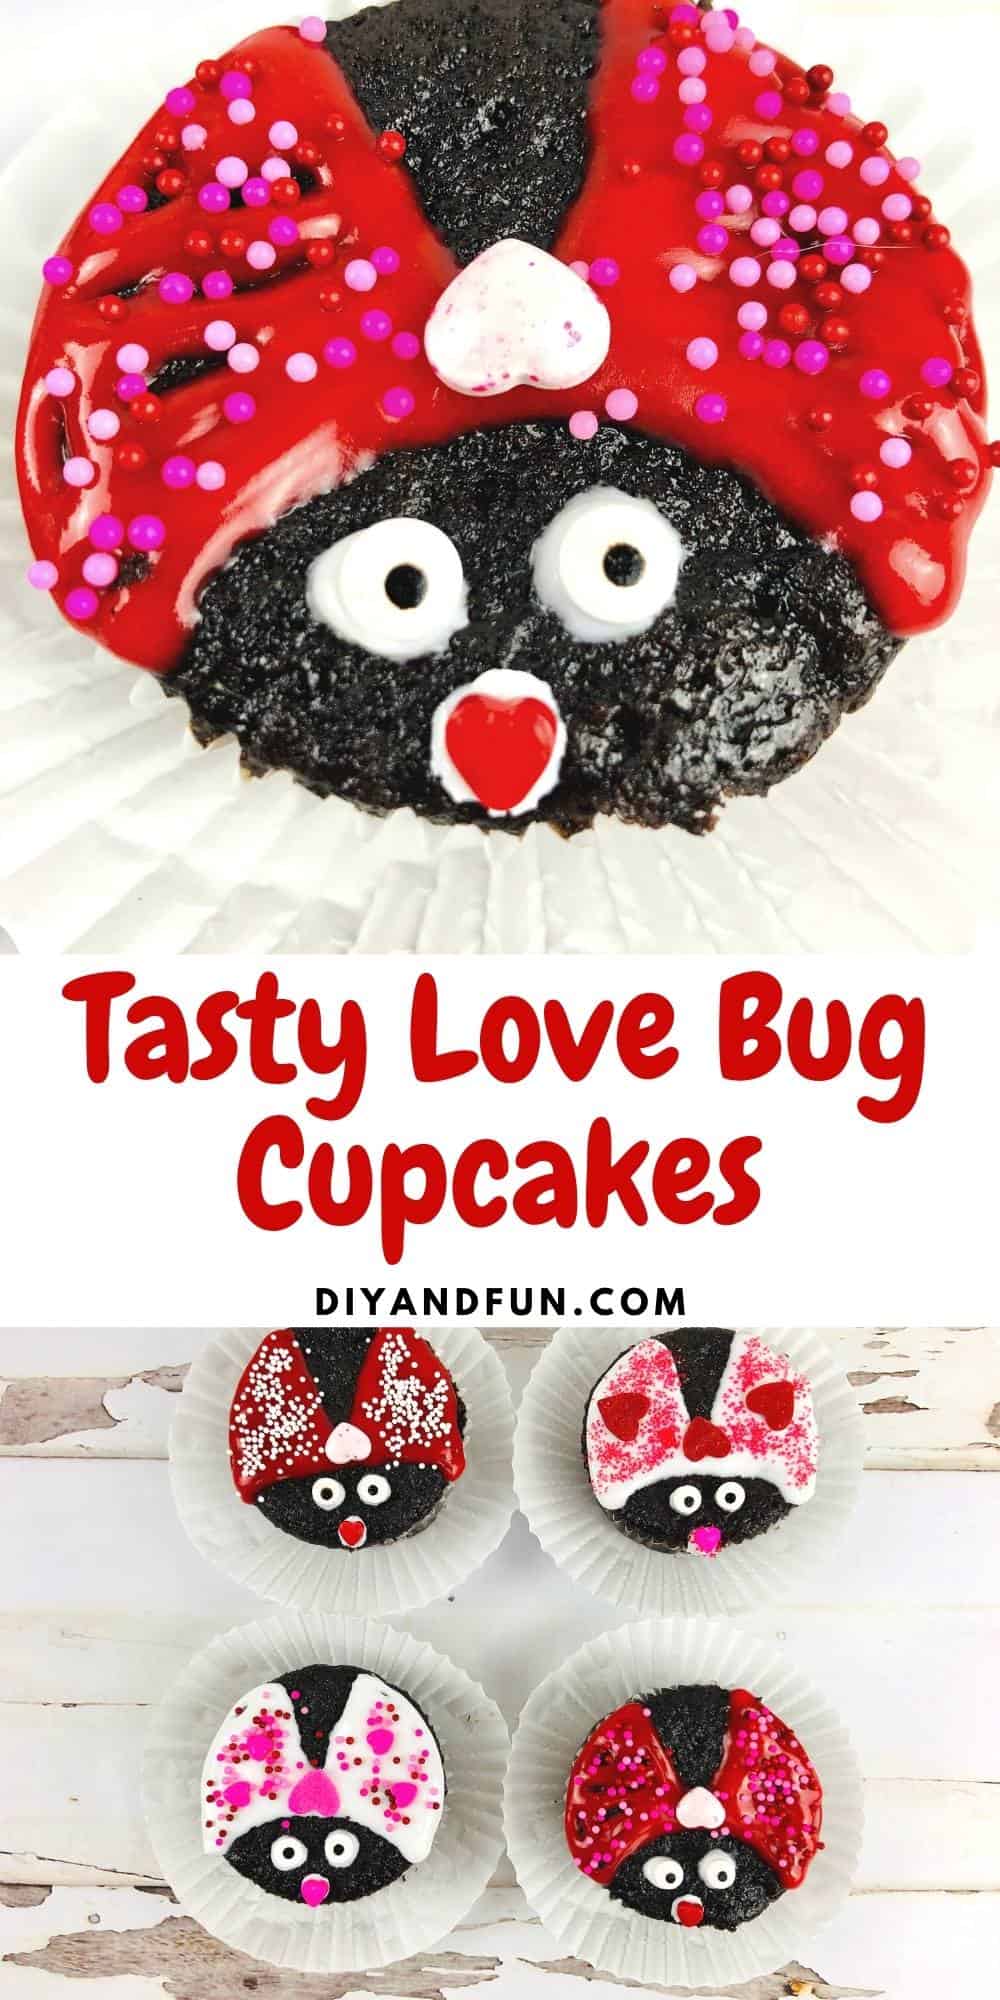 Tasty Love Bug Cupcakes, an easy recipe for turning chocolate cupcakes in love bugs using edible toppings and frosting.